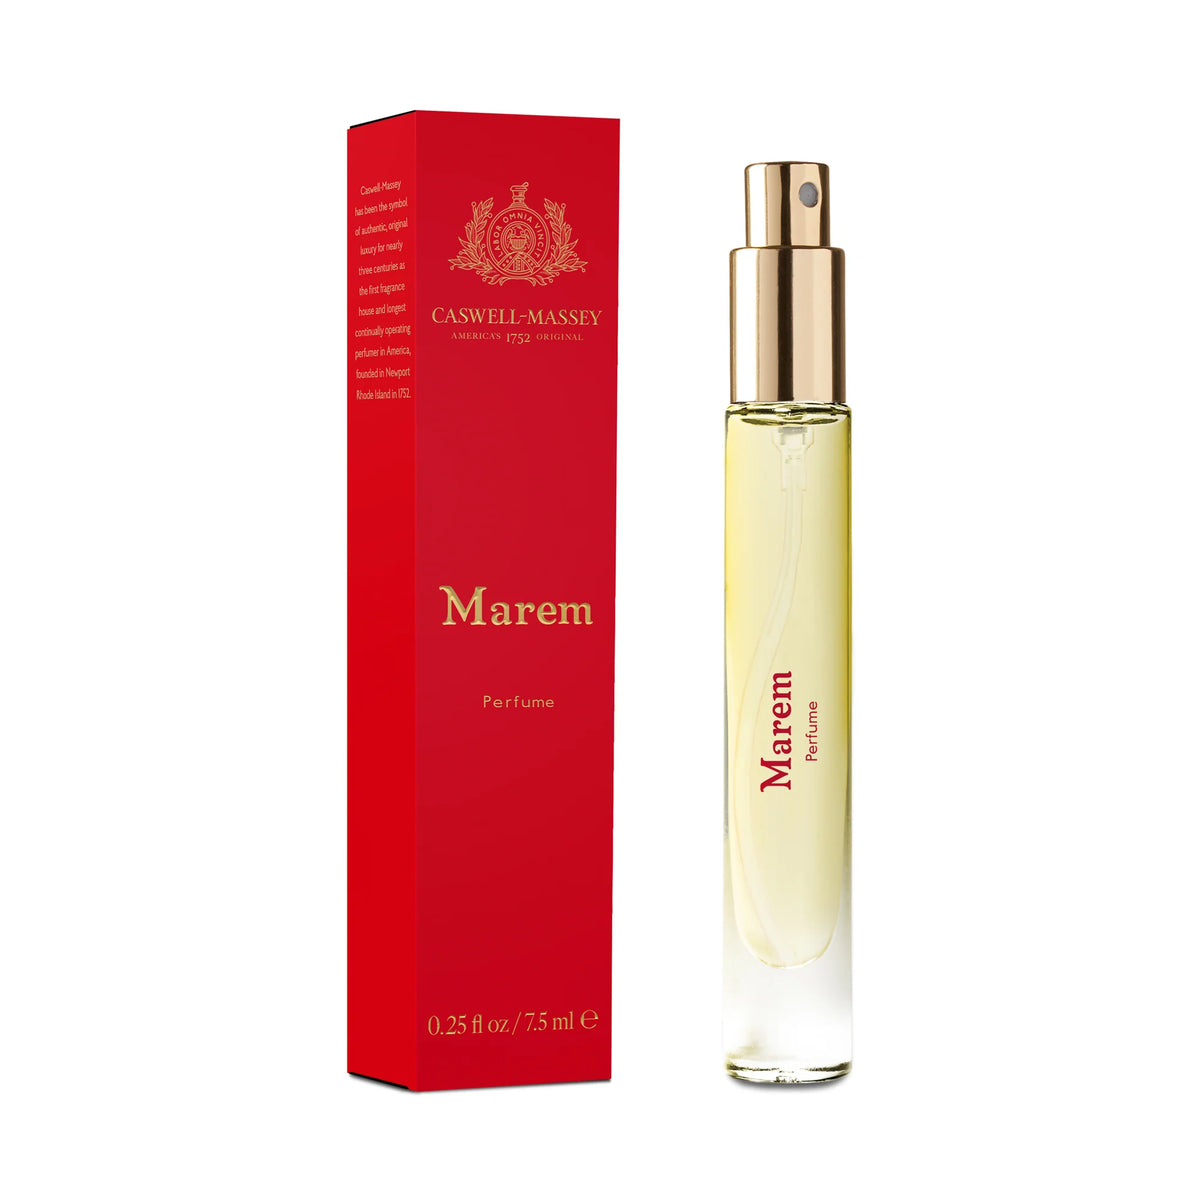 A Caswell - Massey Marem Perfume 7.5ml bottle and its red packaging box with "Caswell-Massey" branding. The cylindrical glass bottle has a golden cap and displays the yellow-tinted Chyp